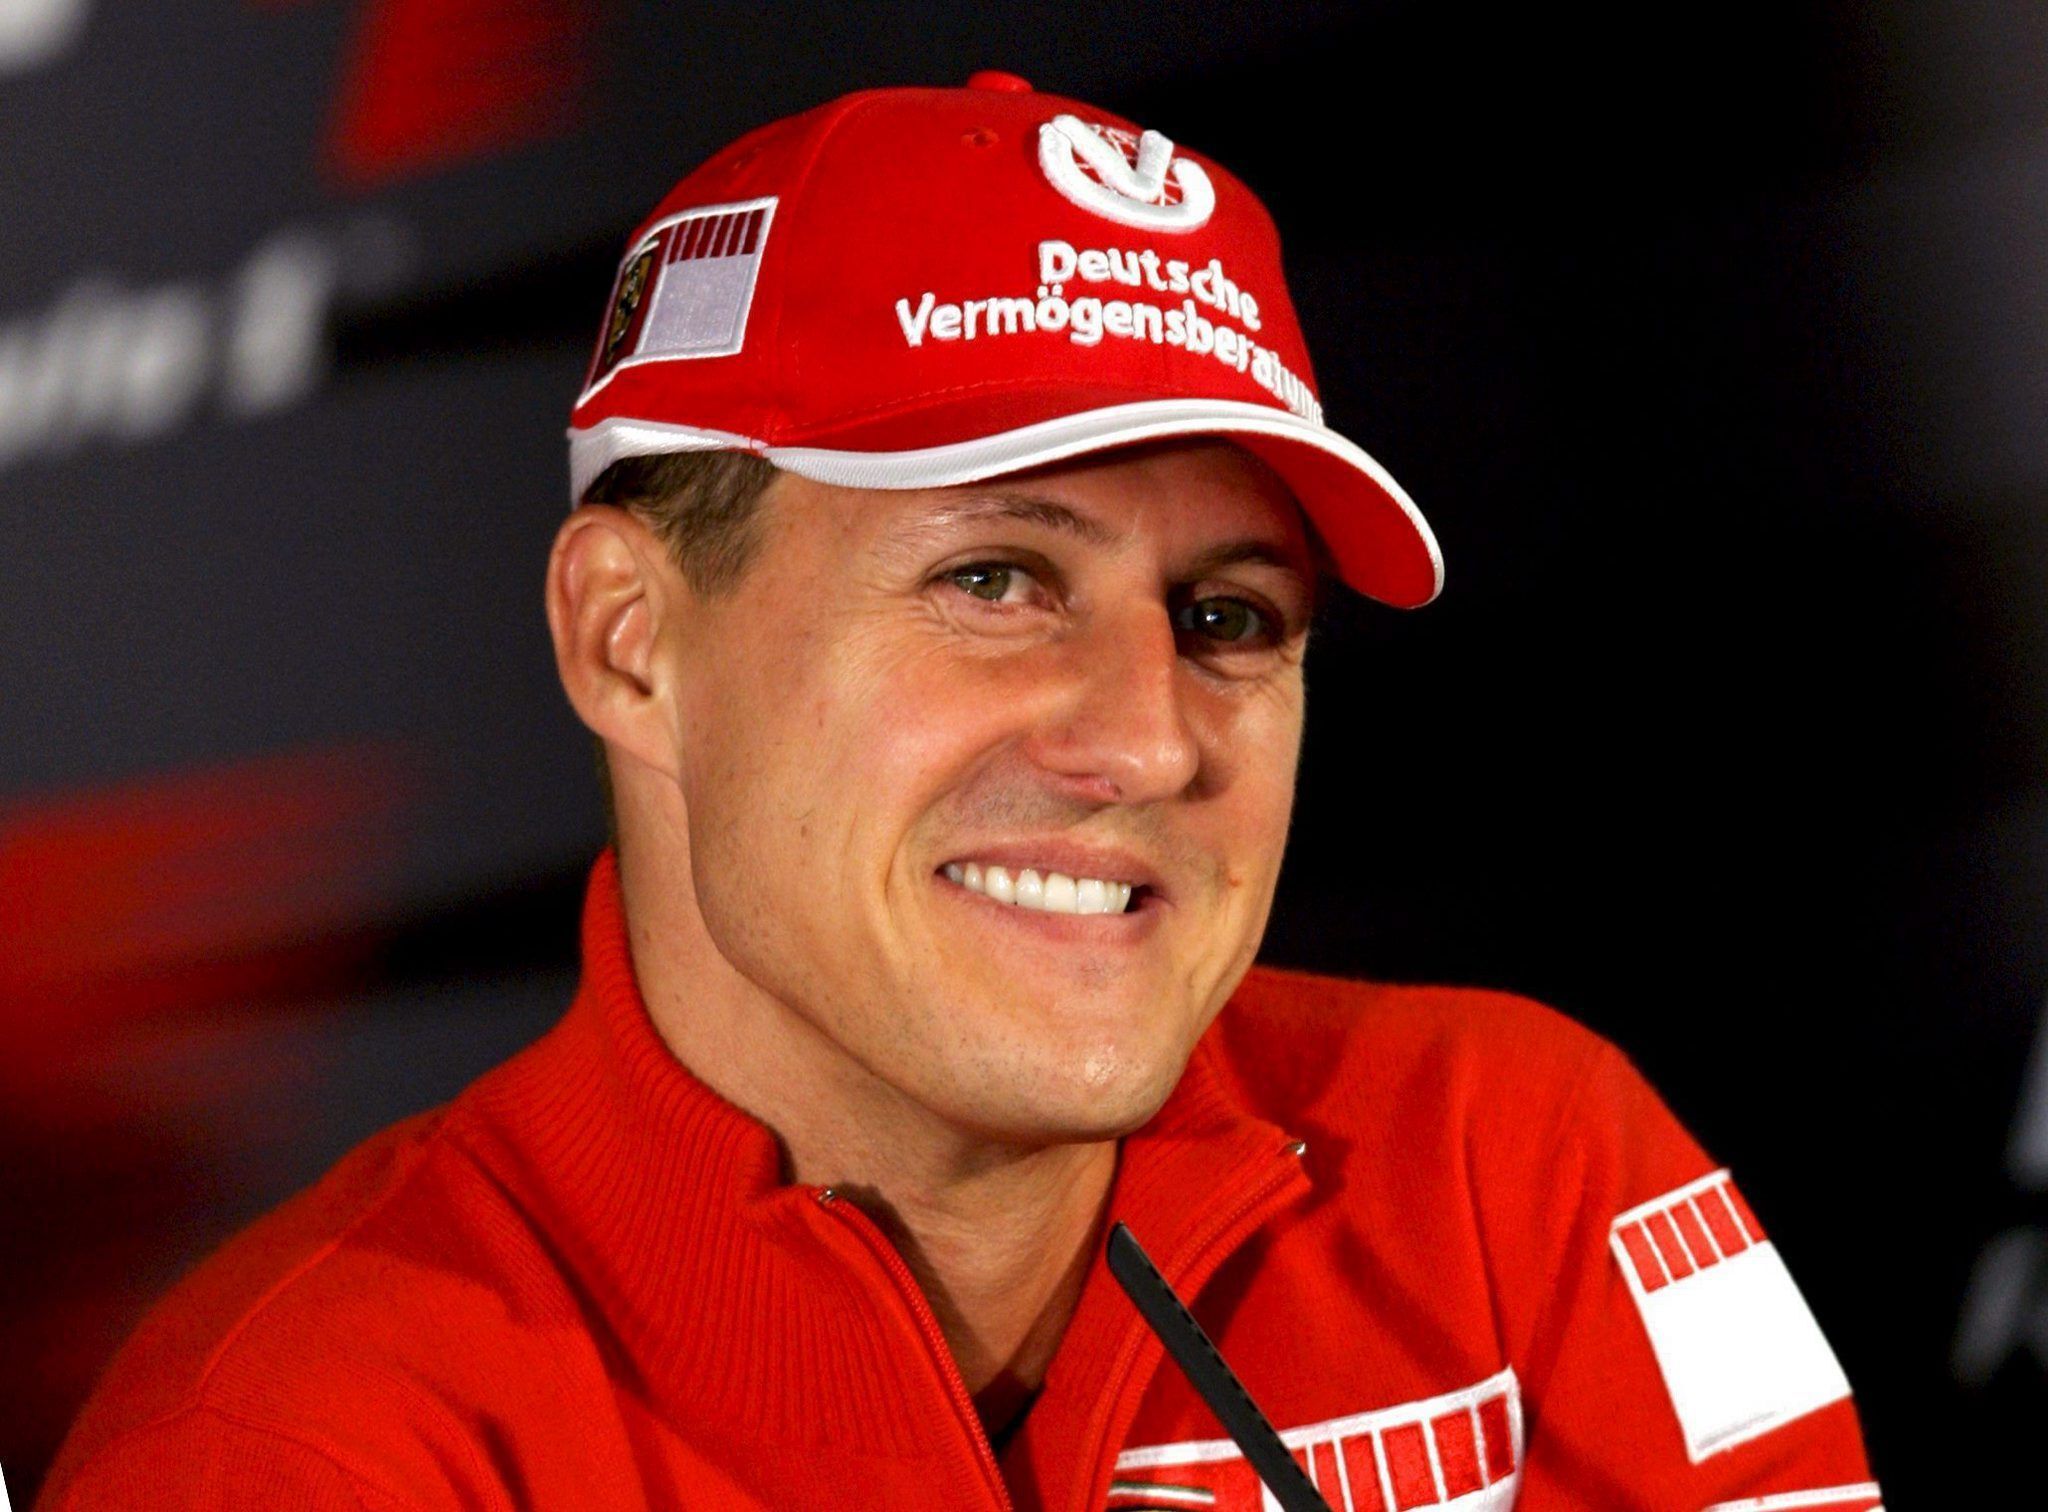 Michael Schumacher Had Insomnia And Feared For His Life After Death Of Ayrton Senna